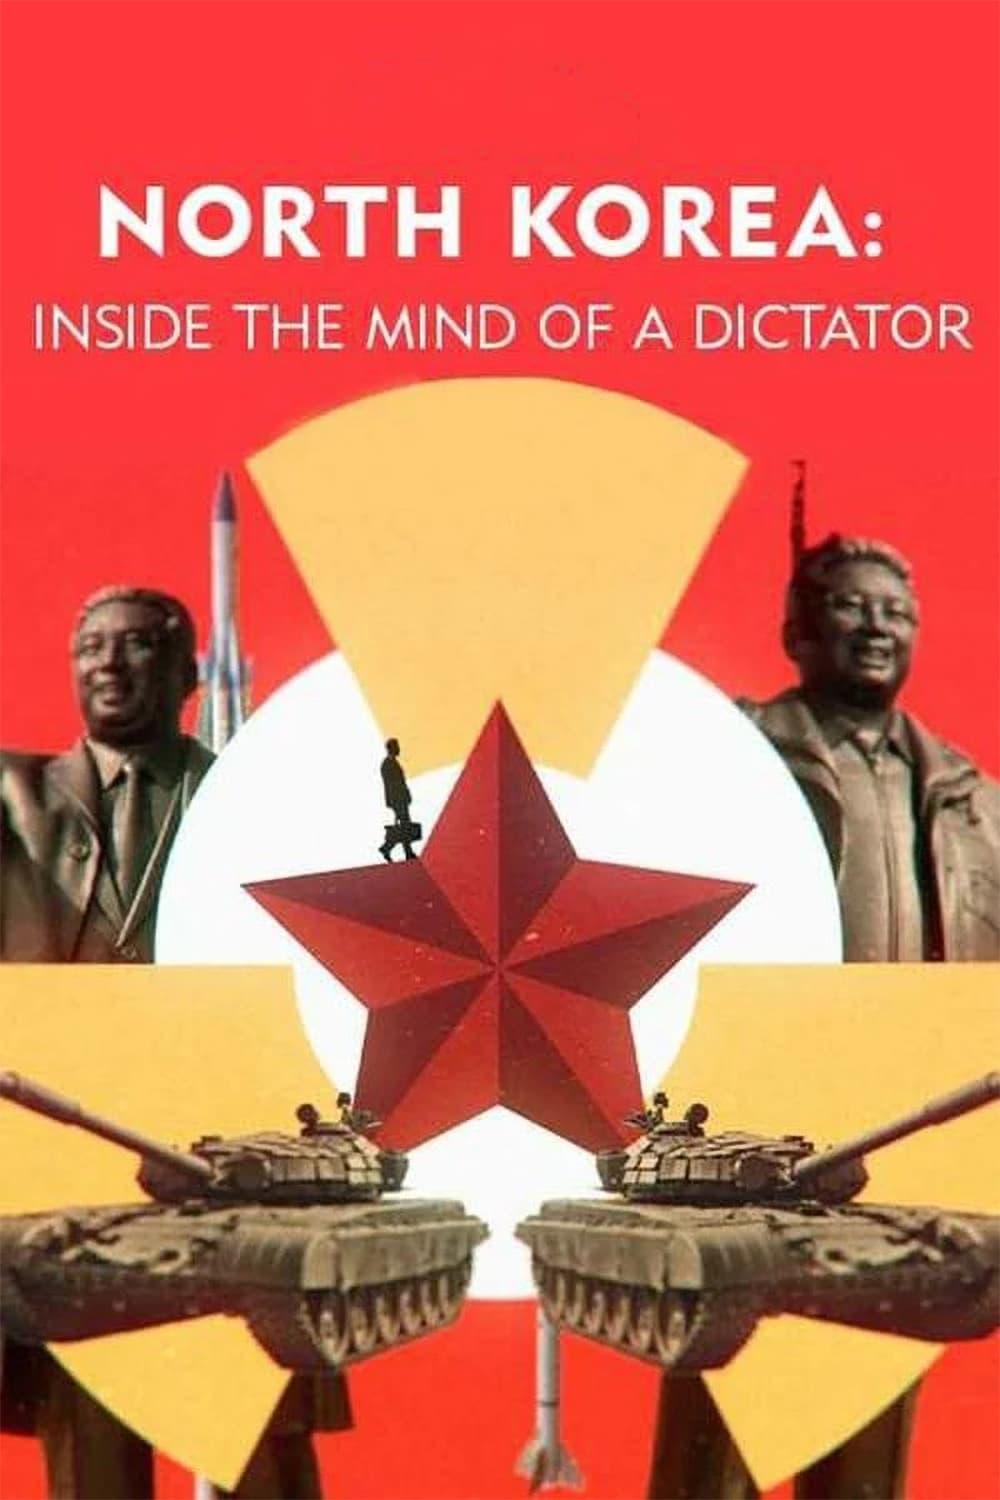 North Korea: Inside The Mind of a Dictator poster